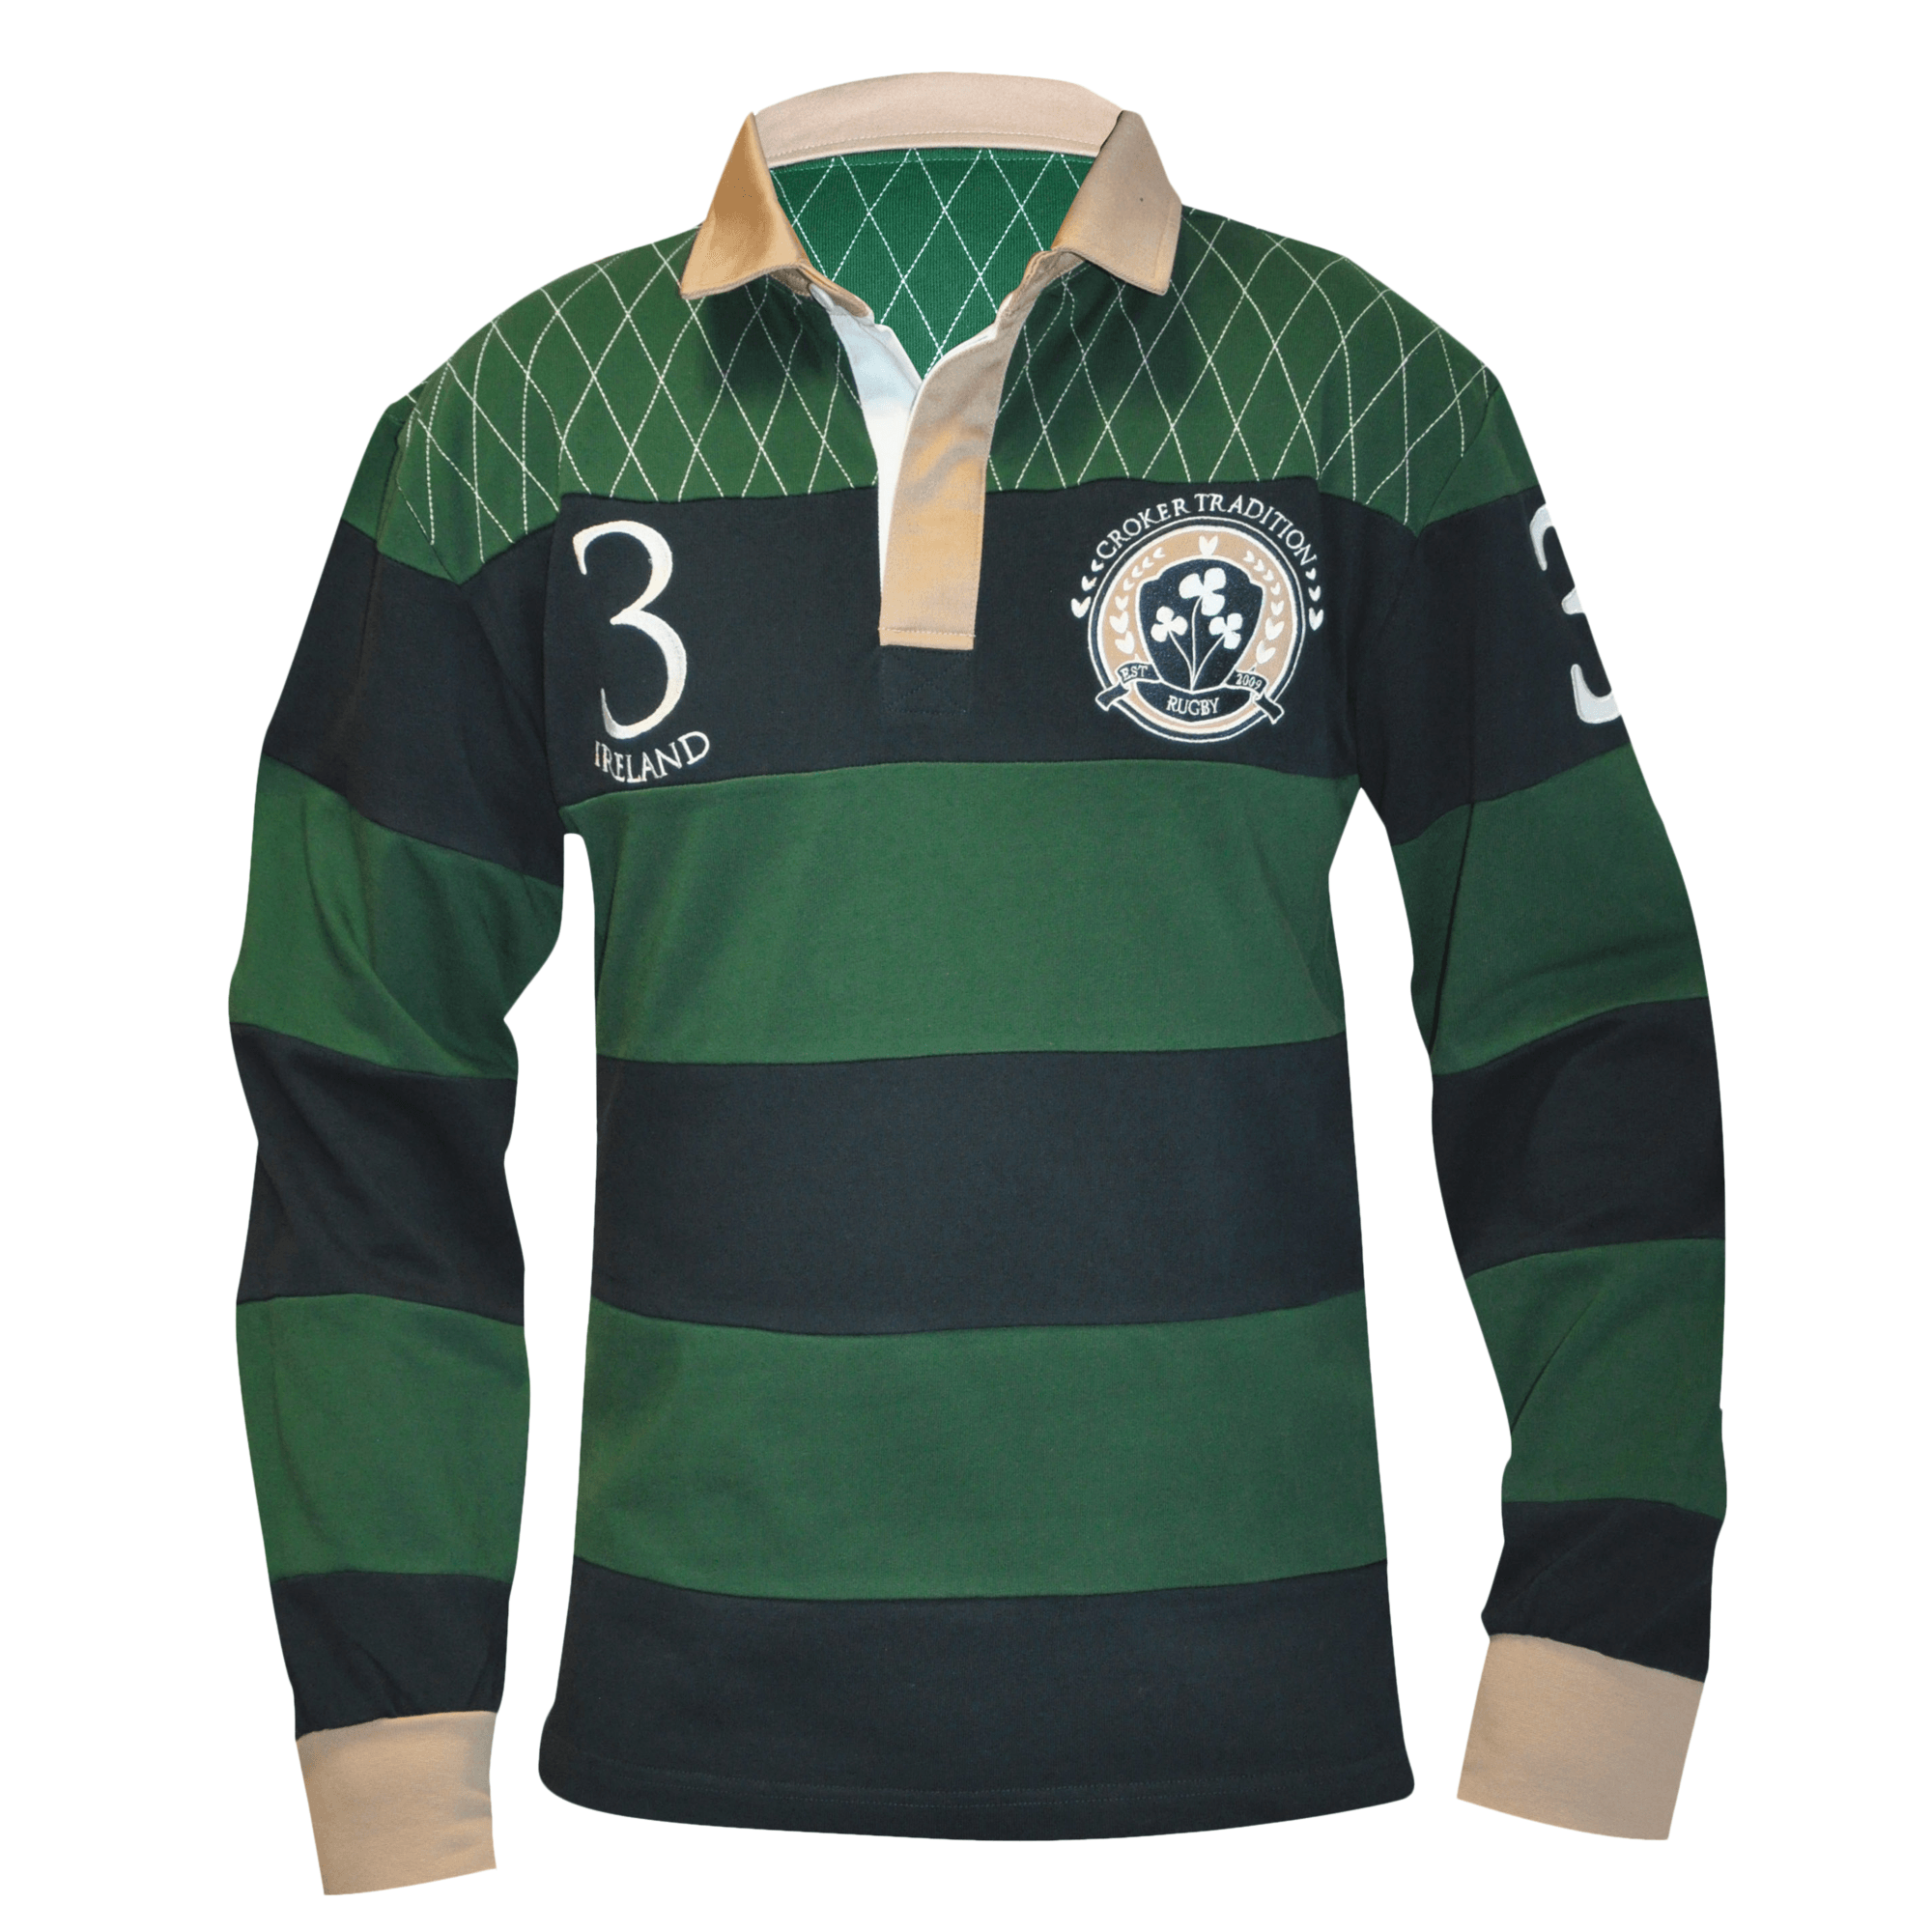 Haut Rugby - Homme - Jersey